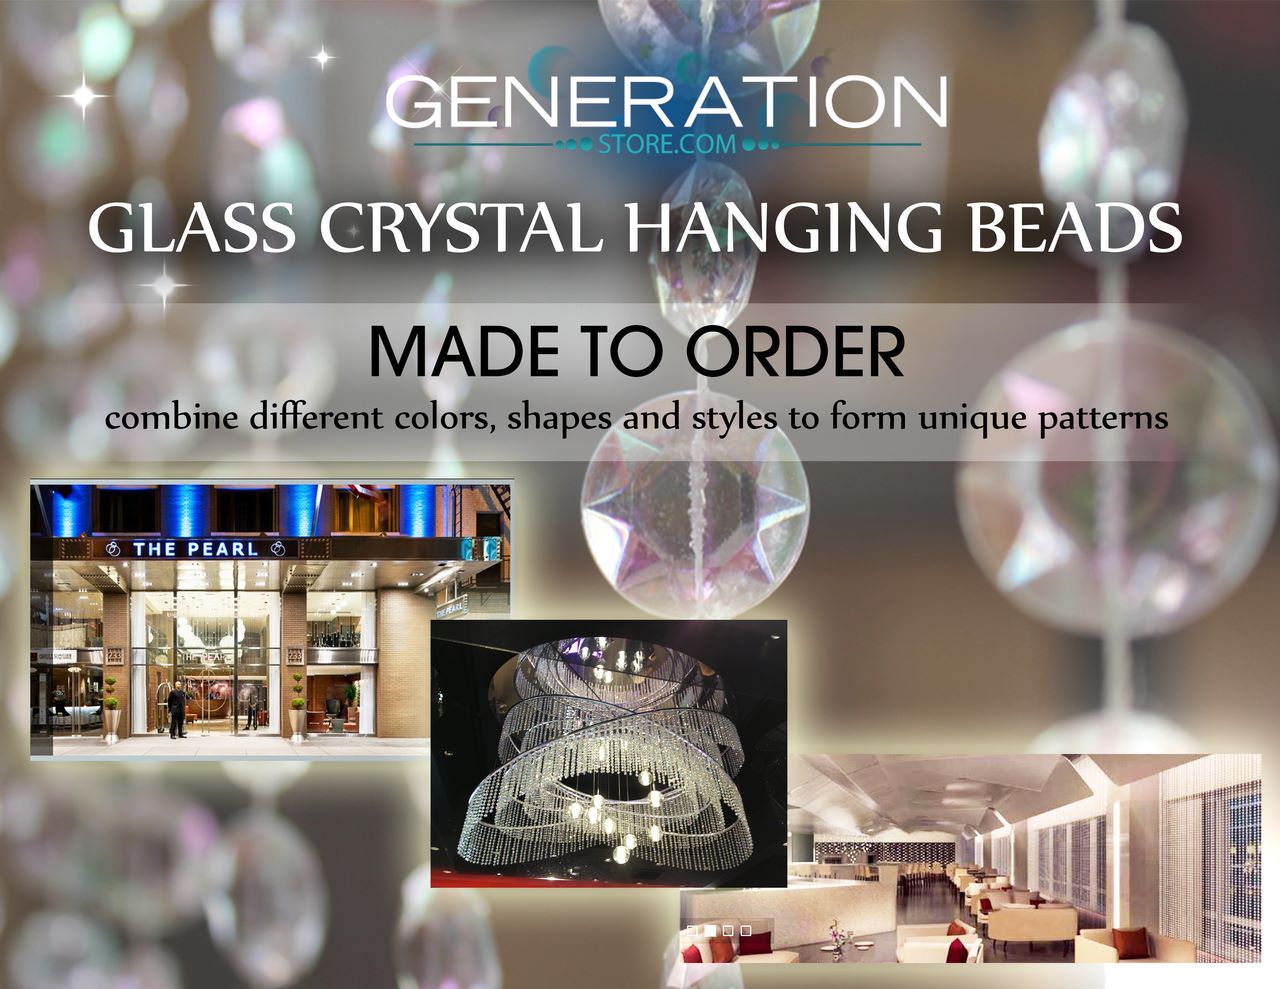 CUSTOM MADE GLASS CRYSTAL HANGING BEADED CURTAINS, CHANDELIERS AND